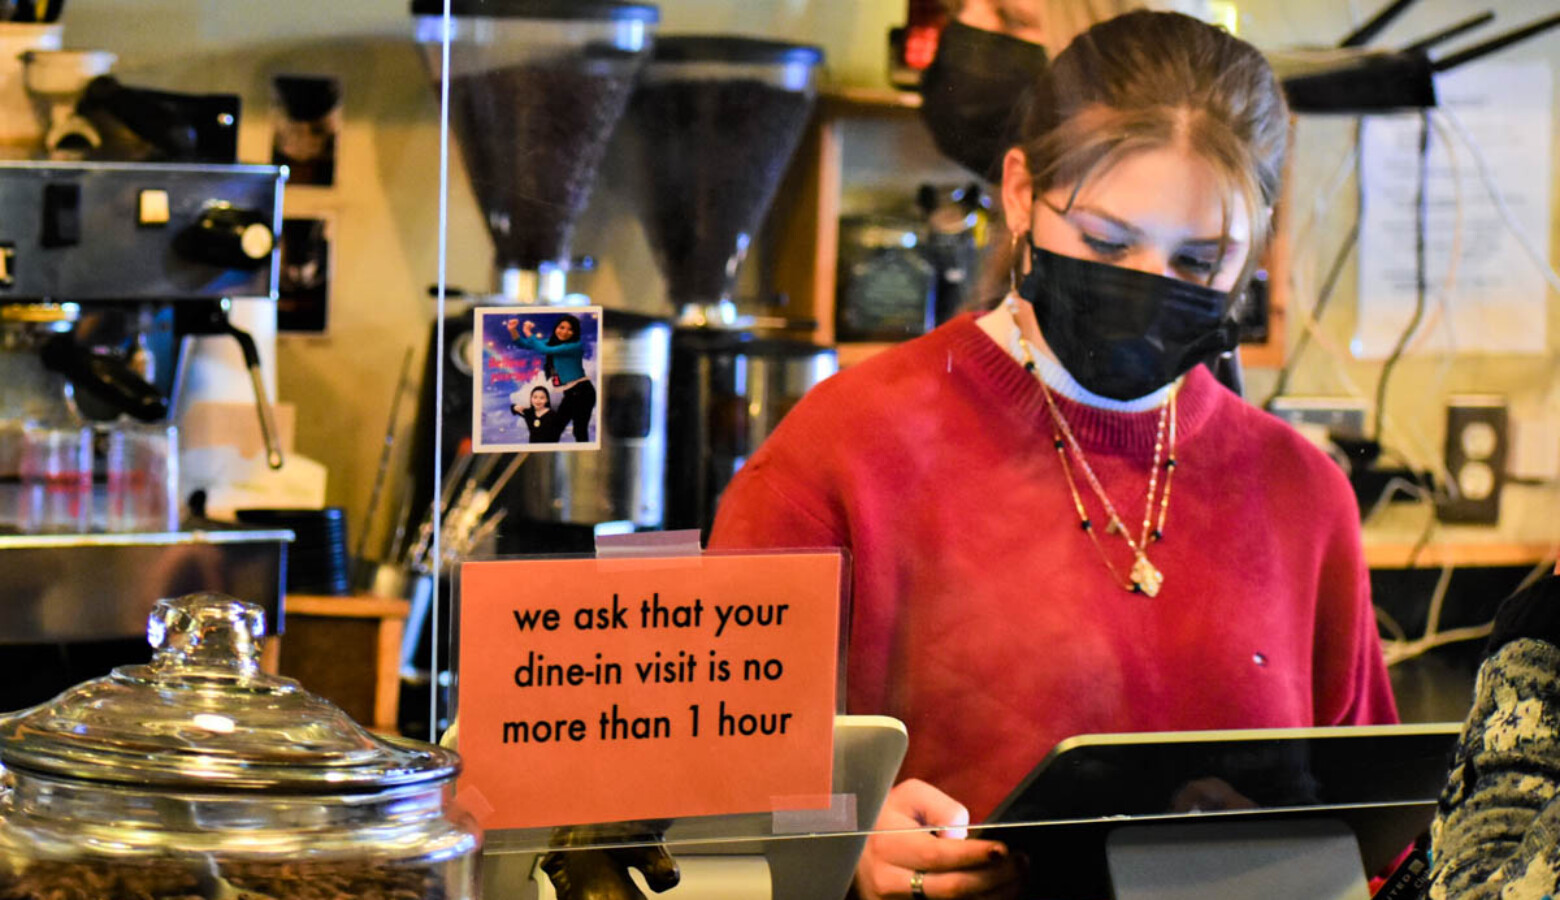 A young worker takes orders at the Blackbird Cafe in Valparaiso. (Justin Hicks/IPB News)